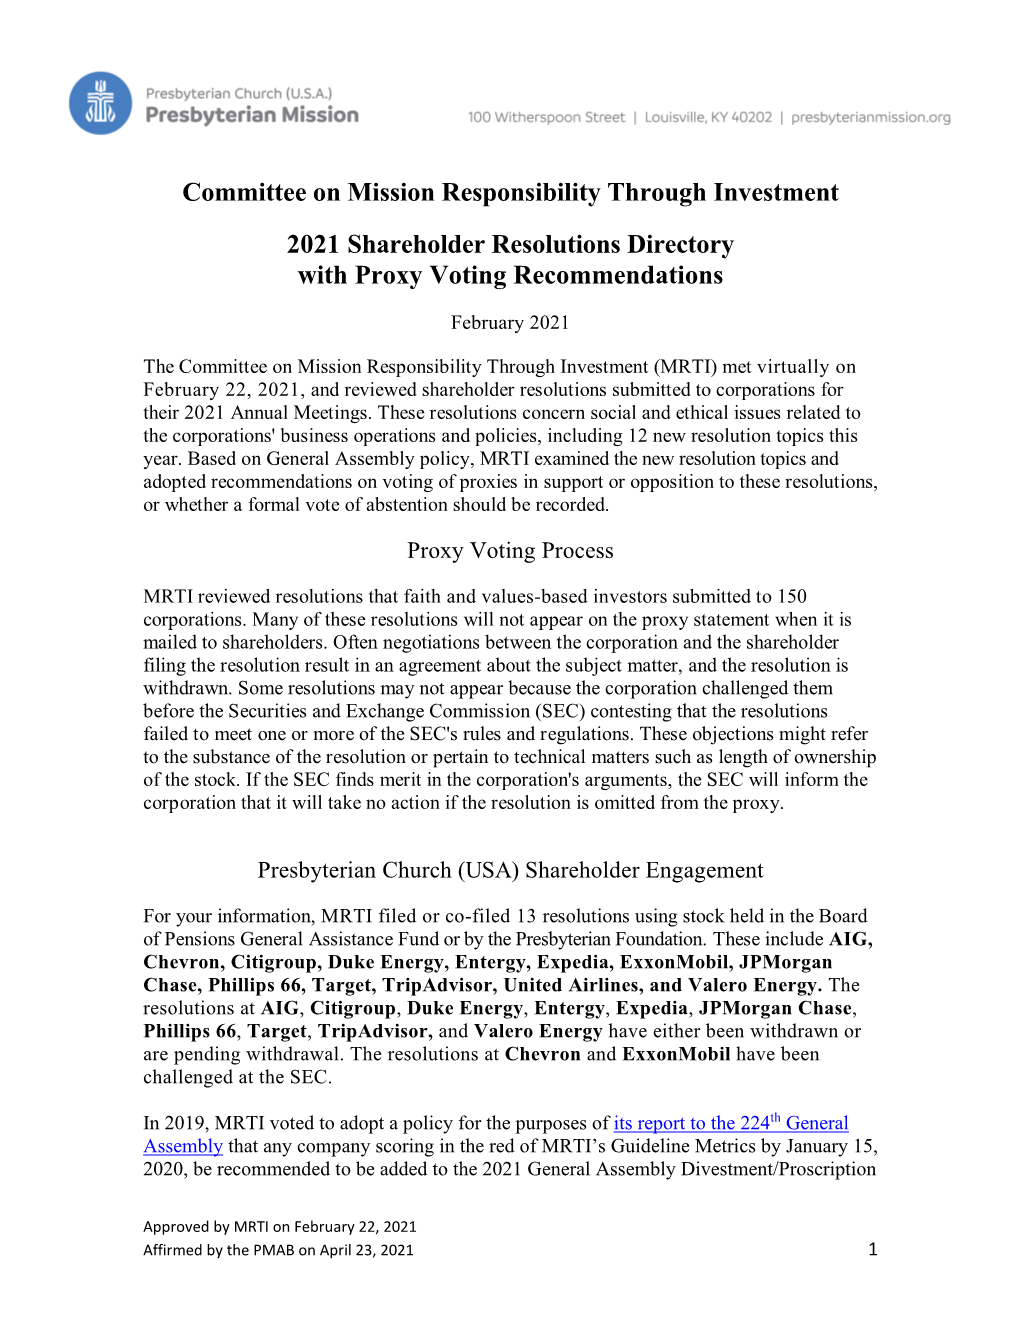 Committee on Mission Responsibility Through Investment 2021 Shareholder Resolutions Directory with Proxy Voting Recommendations